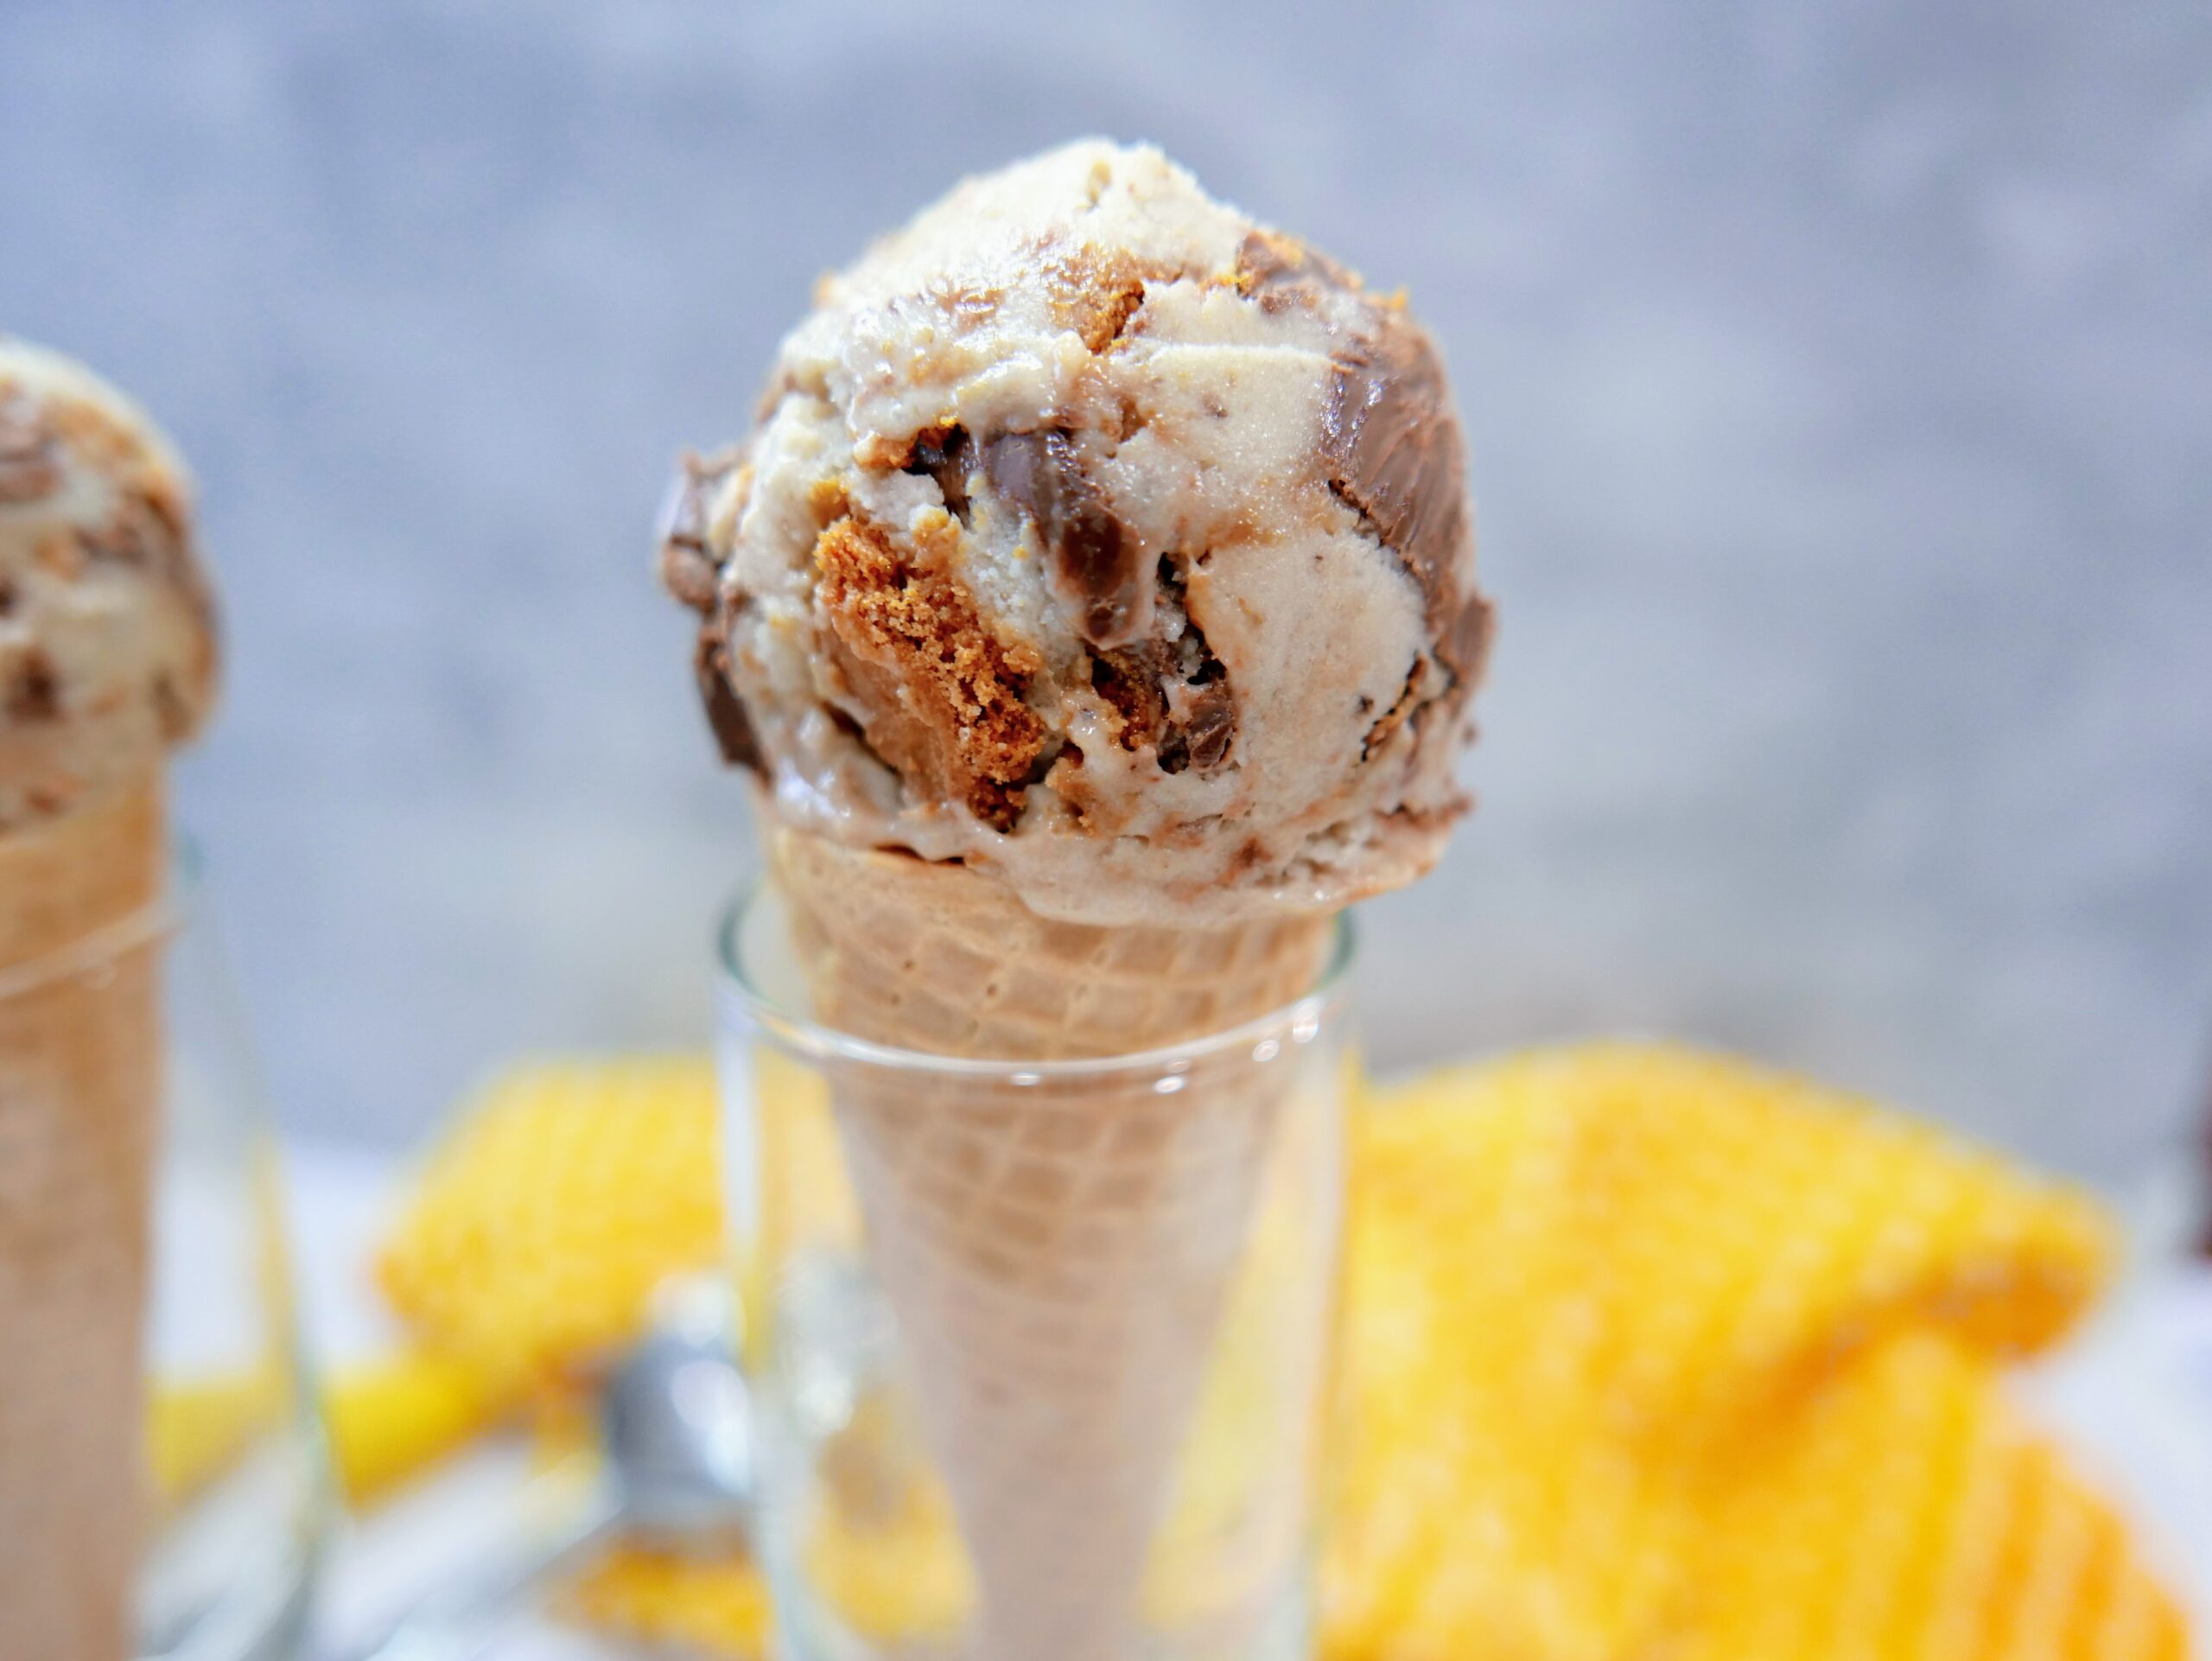 frozen banana ice cream with Nutella and Biscoff